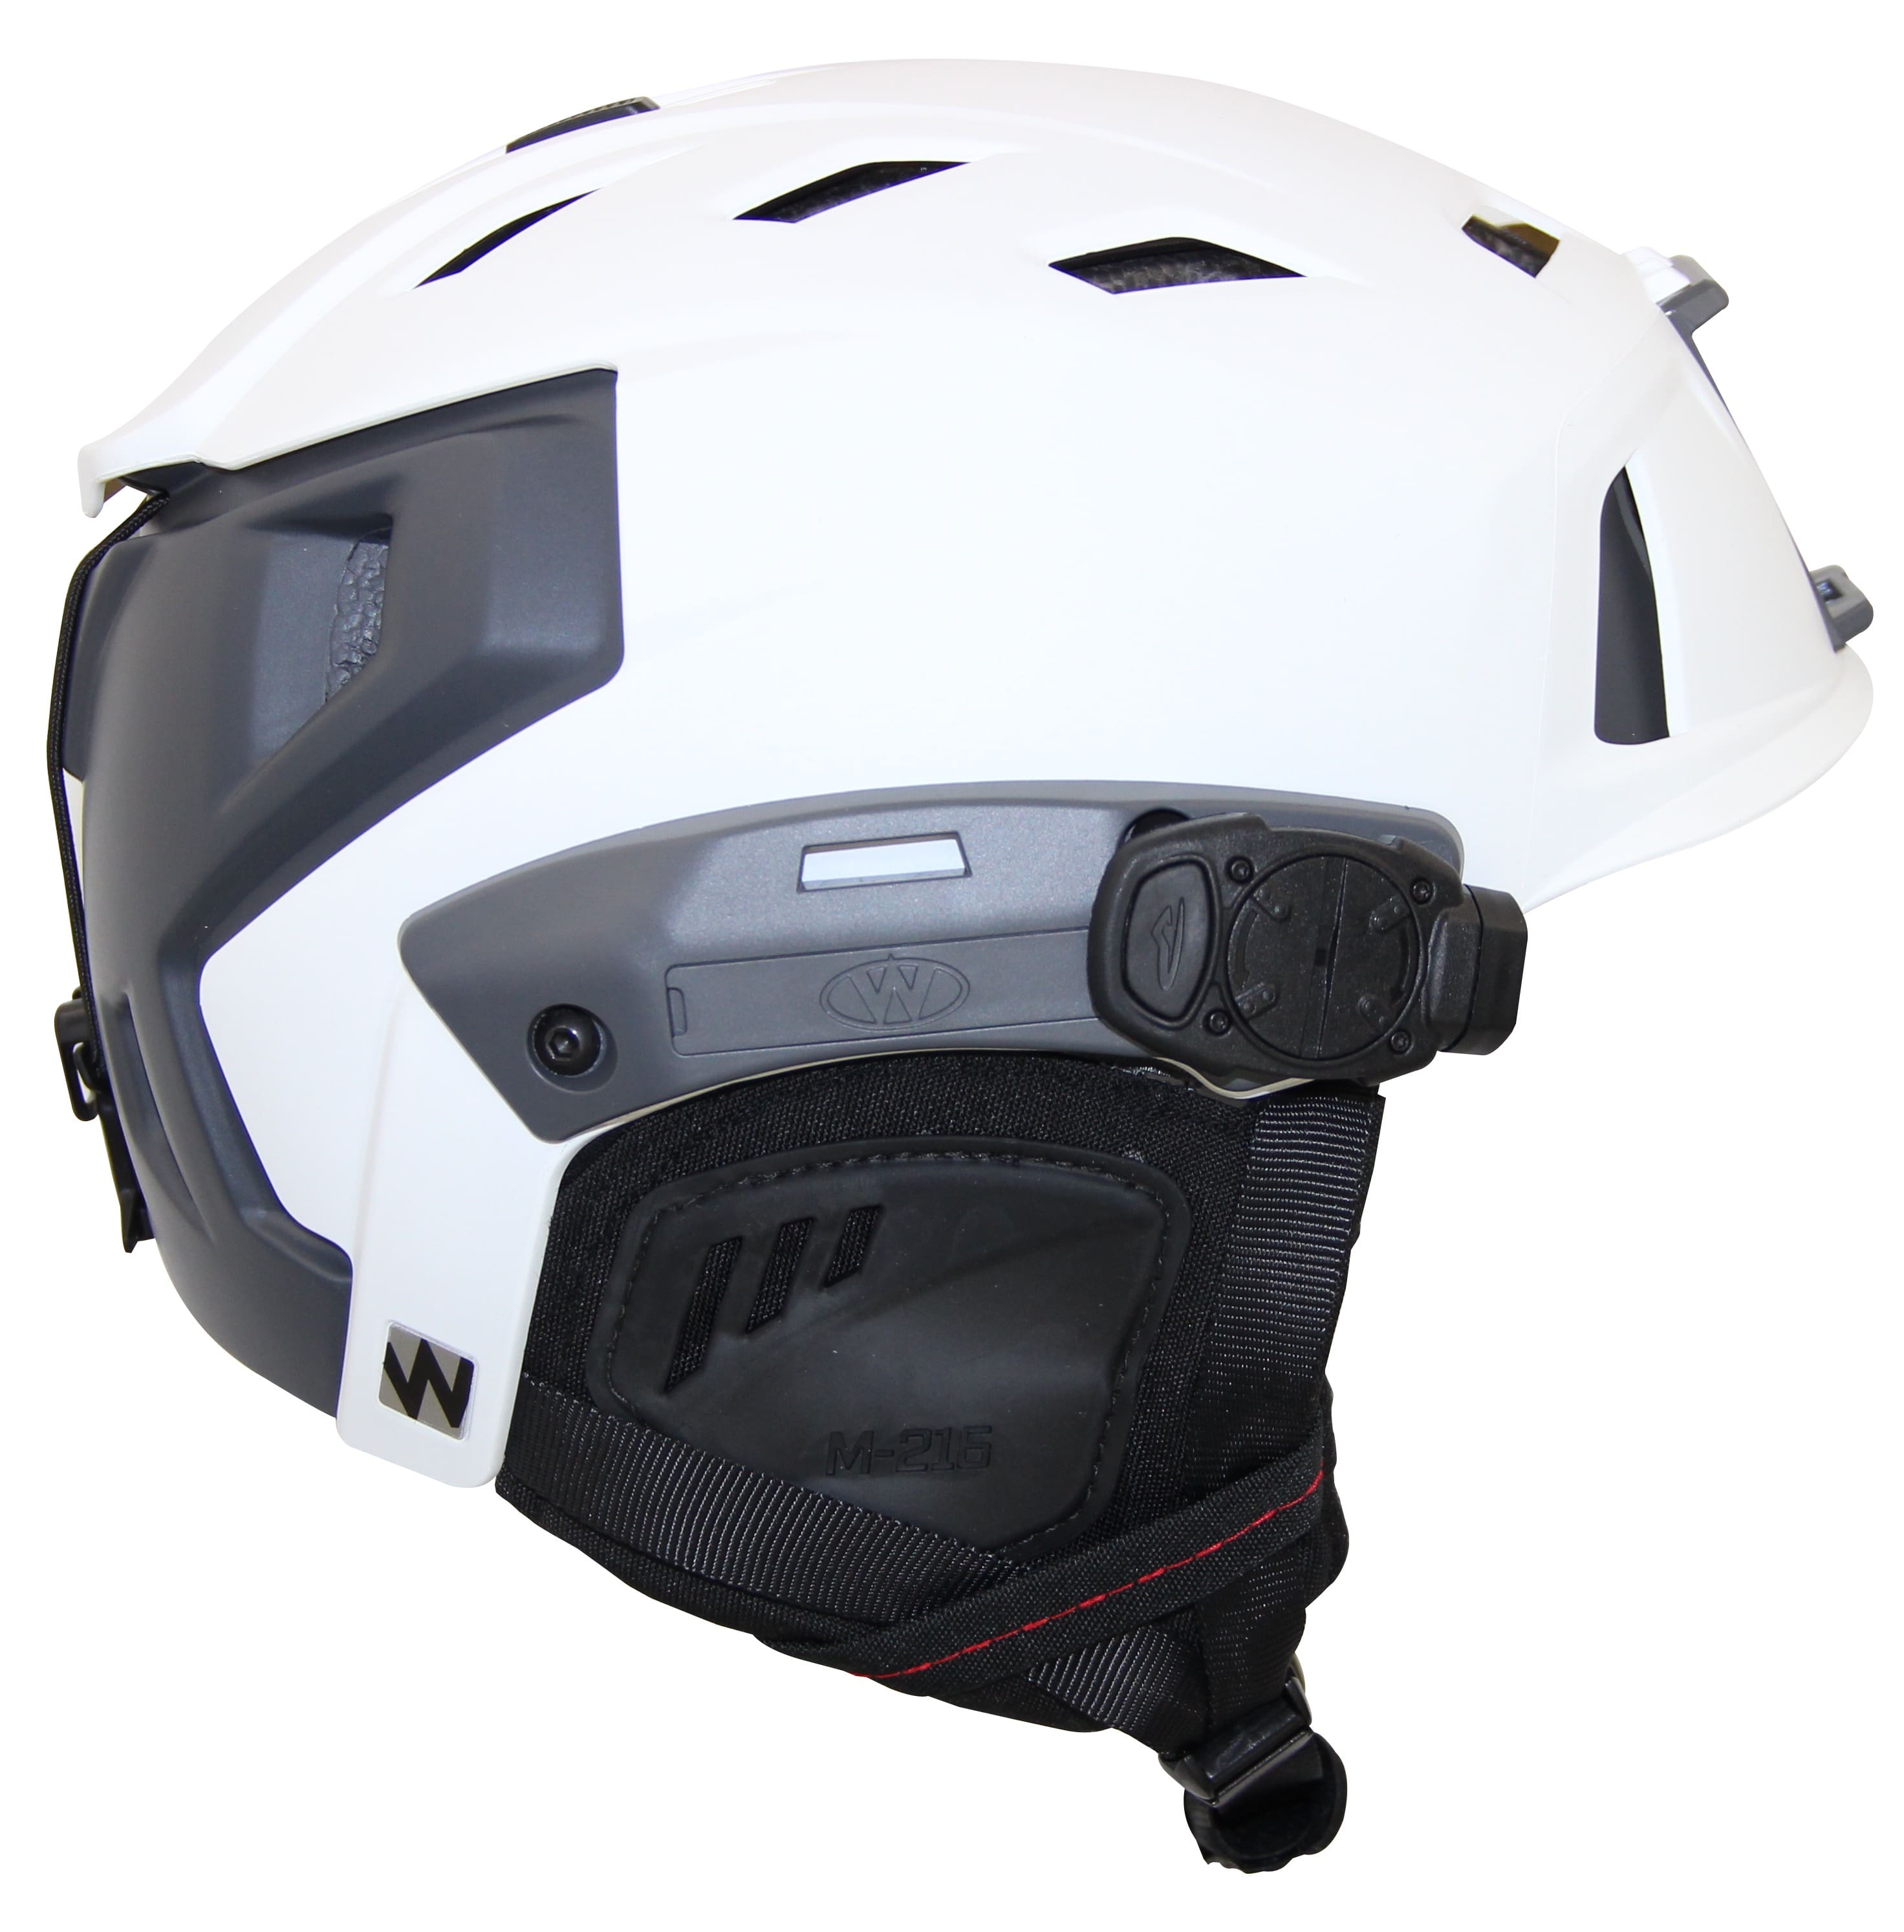 Team Wendy M-216 Ski Search  Rescue Helmet - Soldier Systems Daily